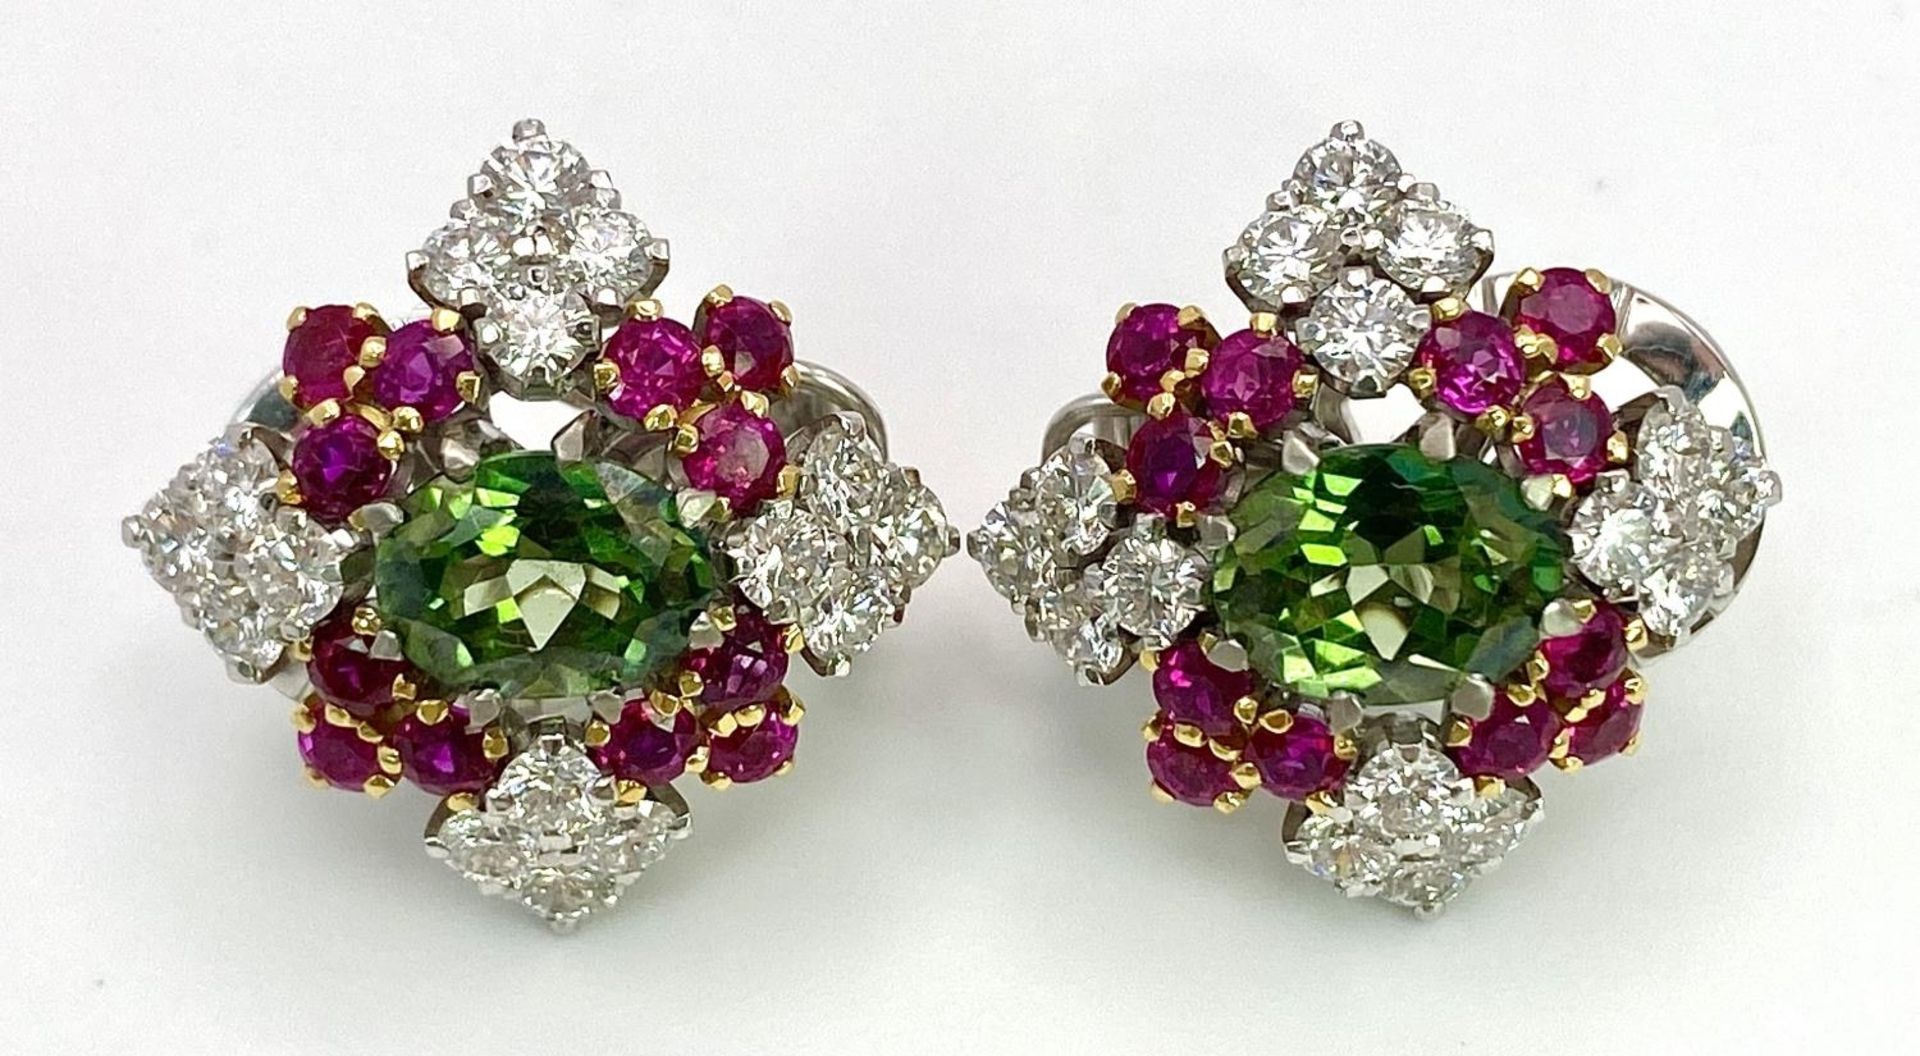 A Pair of Platinum, Emerald, Ruby and Diamond Earrings. Each earring containing a 1.5ct oval cut